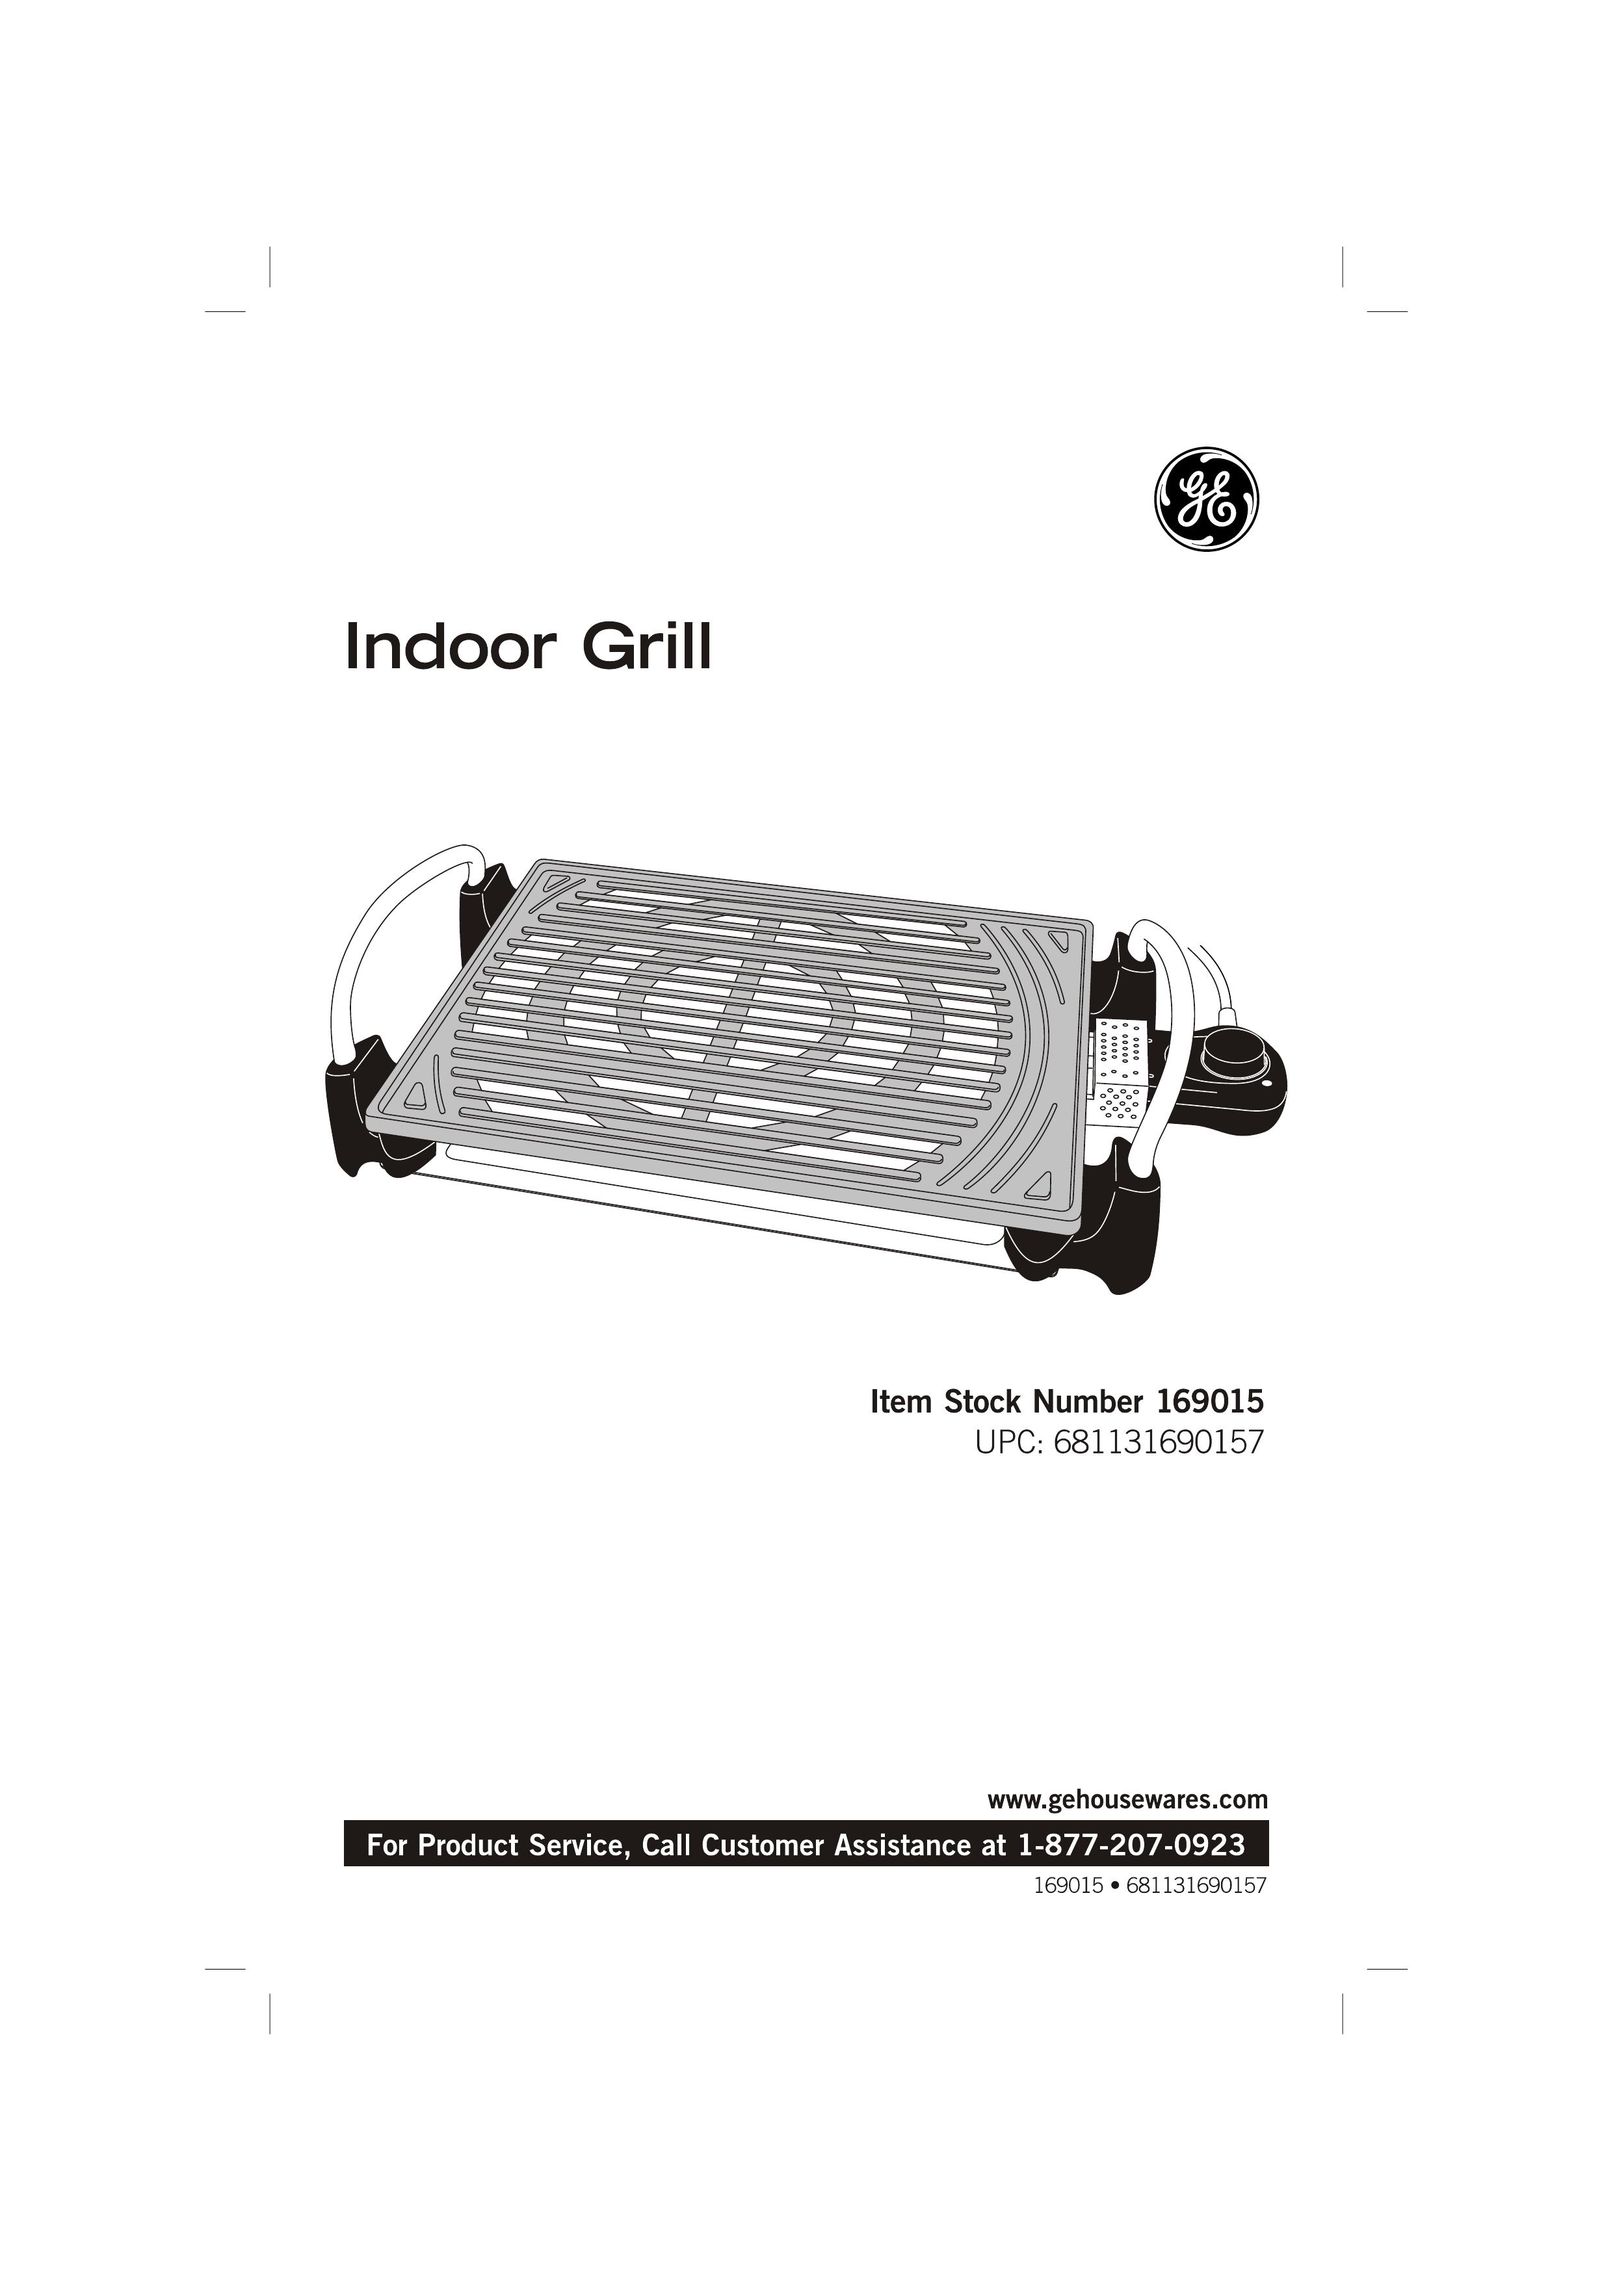 GE 169015 Kitchen Grill User Manual